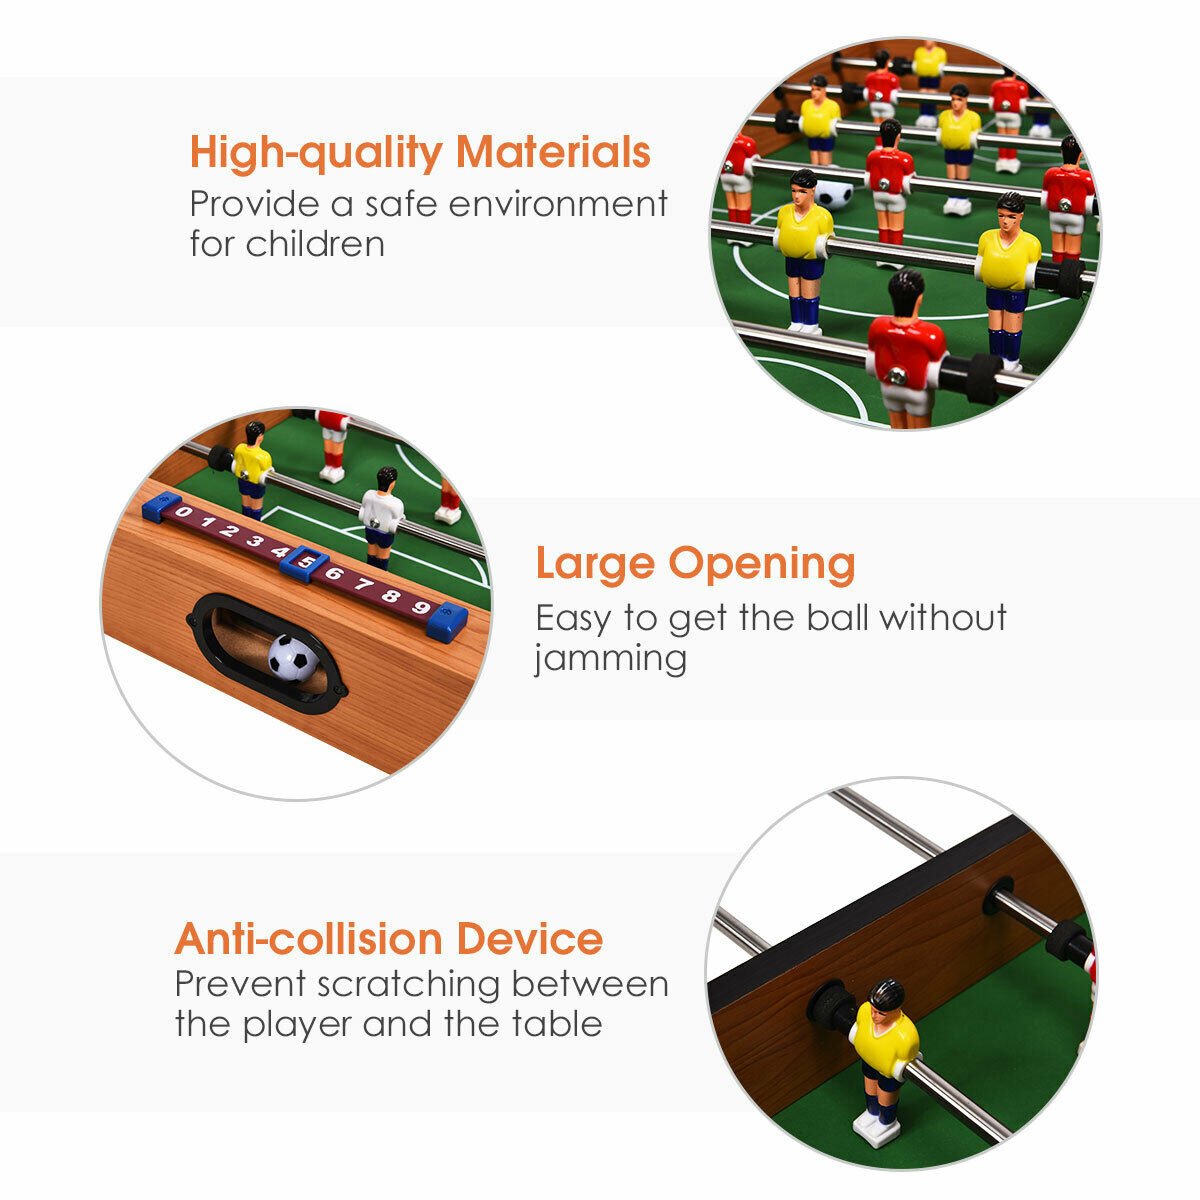 Football Table Fun for Kids and Adults - Buy Now!